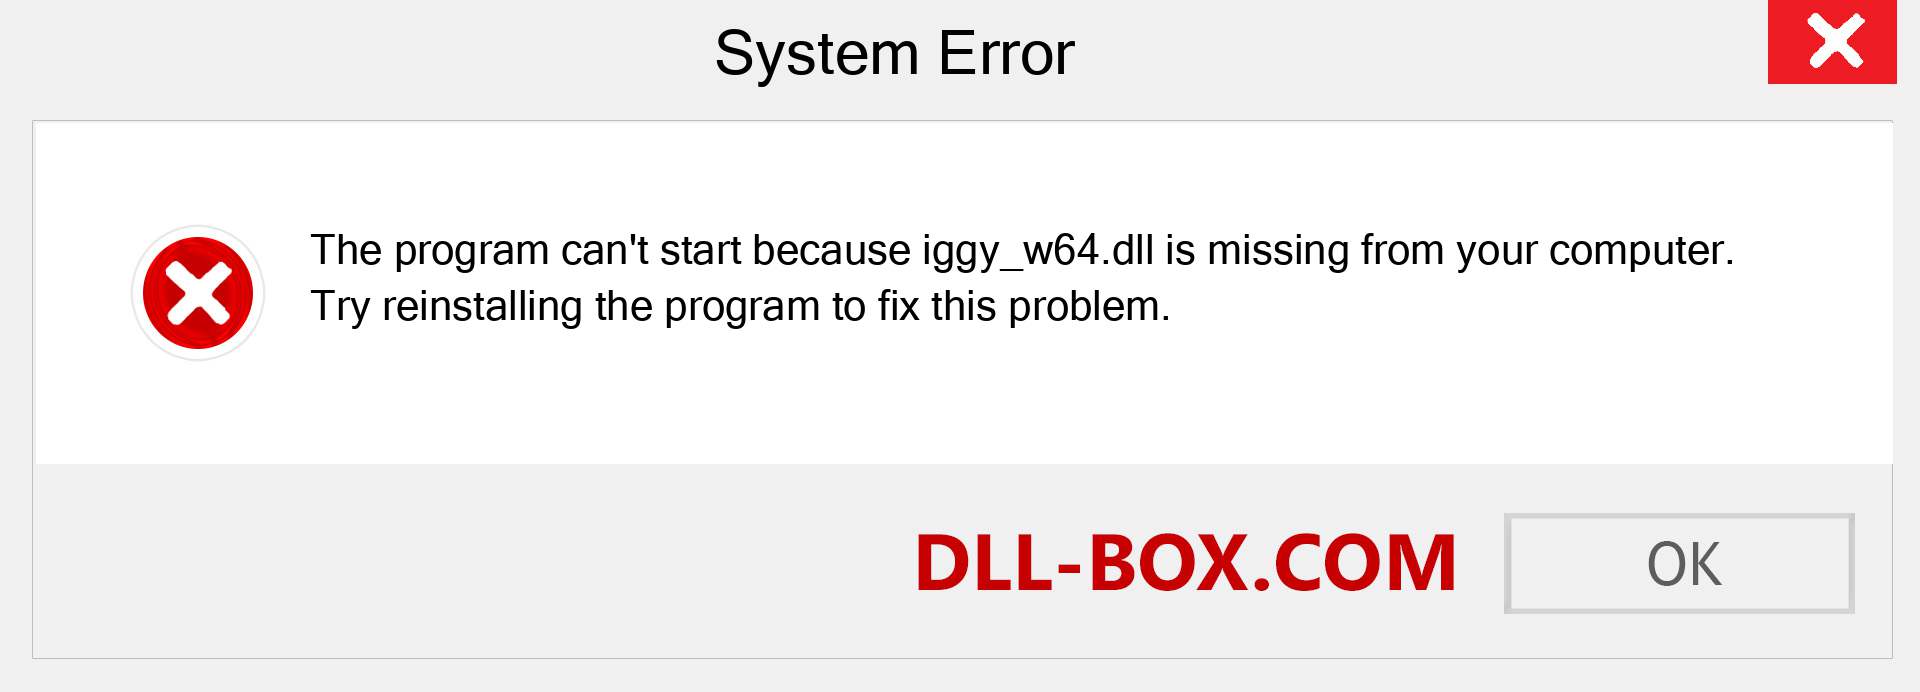  iggy_w64.dll file is missing?. Download for Windows 7, 8, 10 - Fix  iggy_w64 dll Missing Error on Windows, photos, images